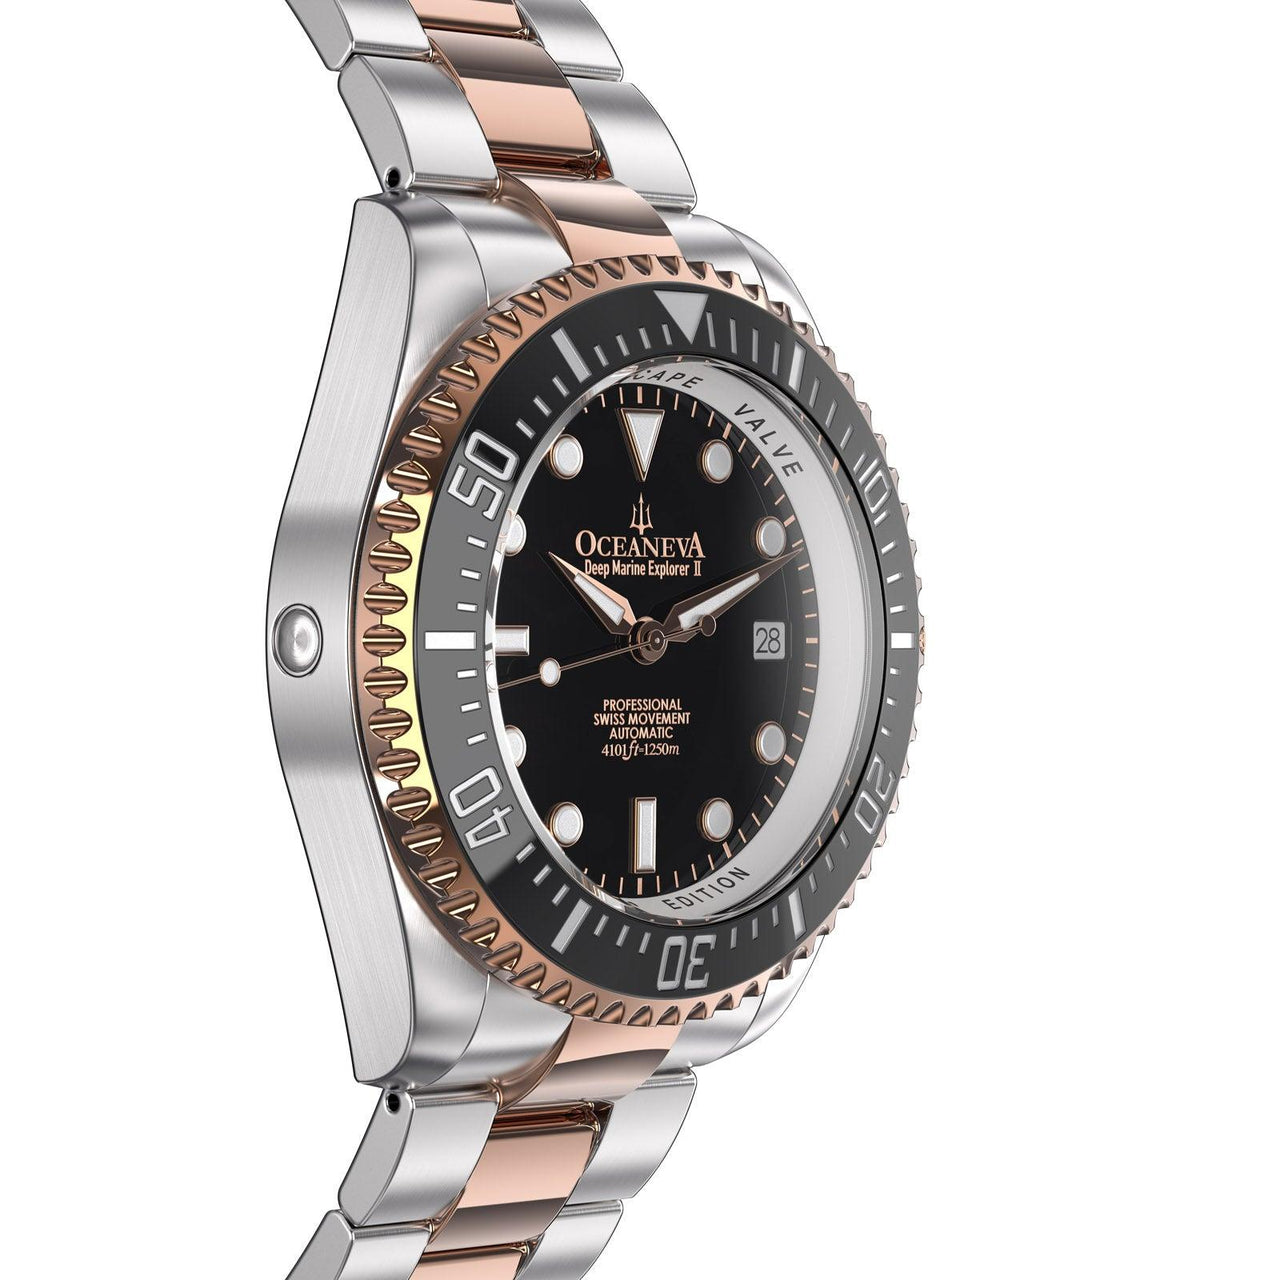 Oceaneva 1250M Dive Watch Black And Rose Gold Side Helium Escape Valve View